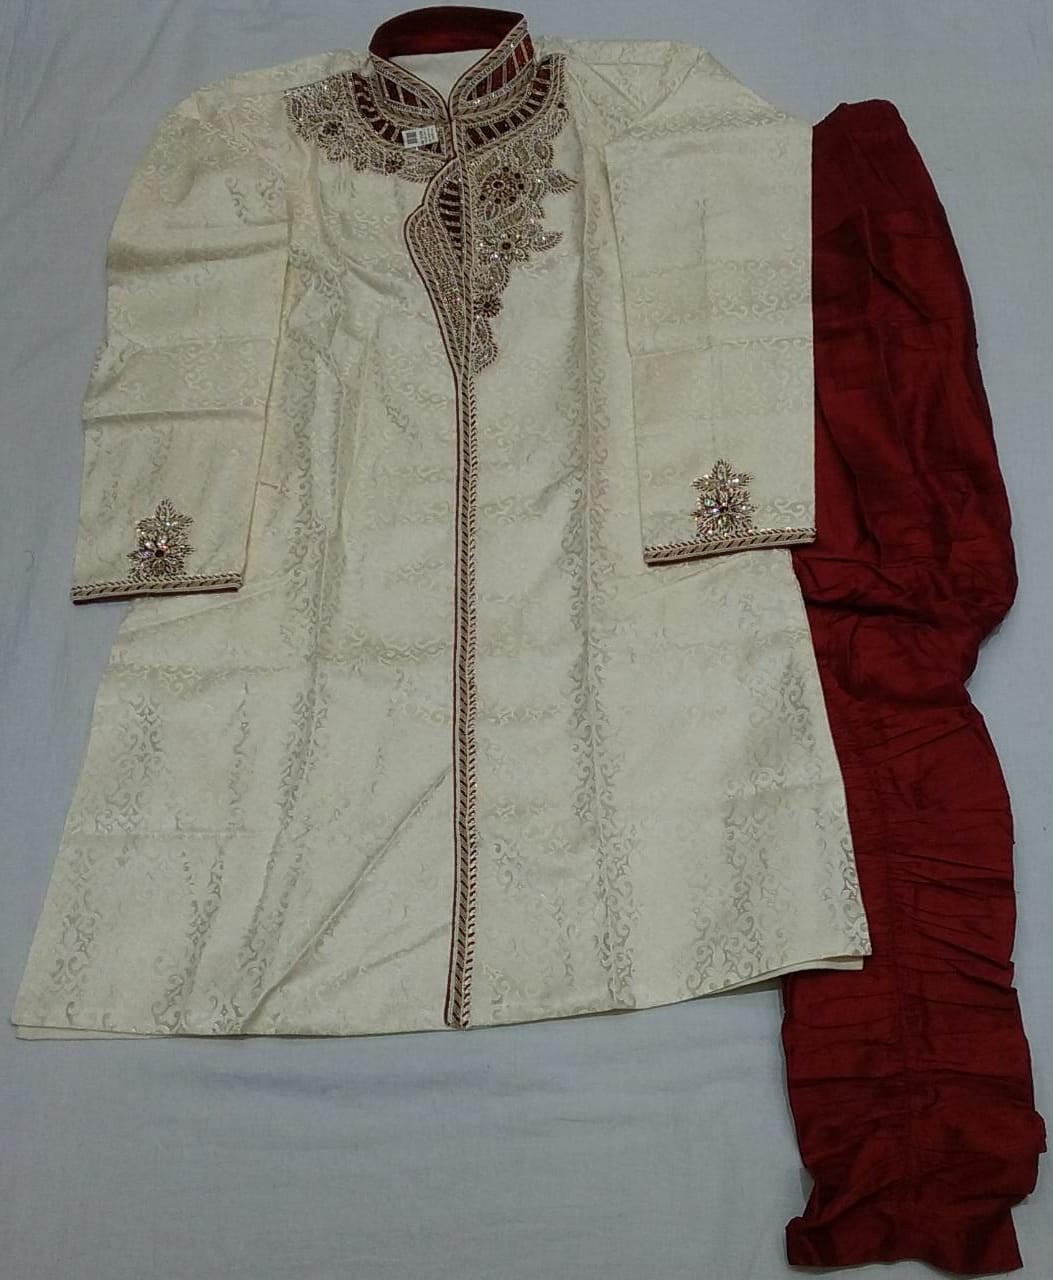 121535 A $272.00 MENS SHERWANI WITH BRITCHES PANT SIZE42 (WEDDING SUIT)